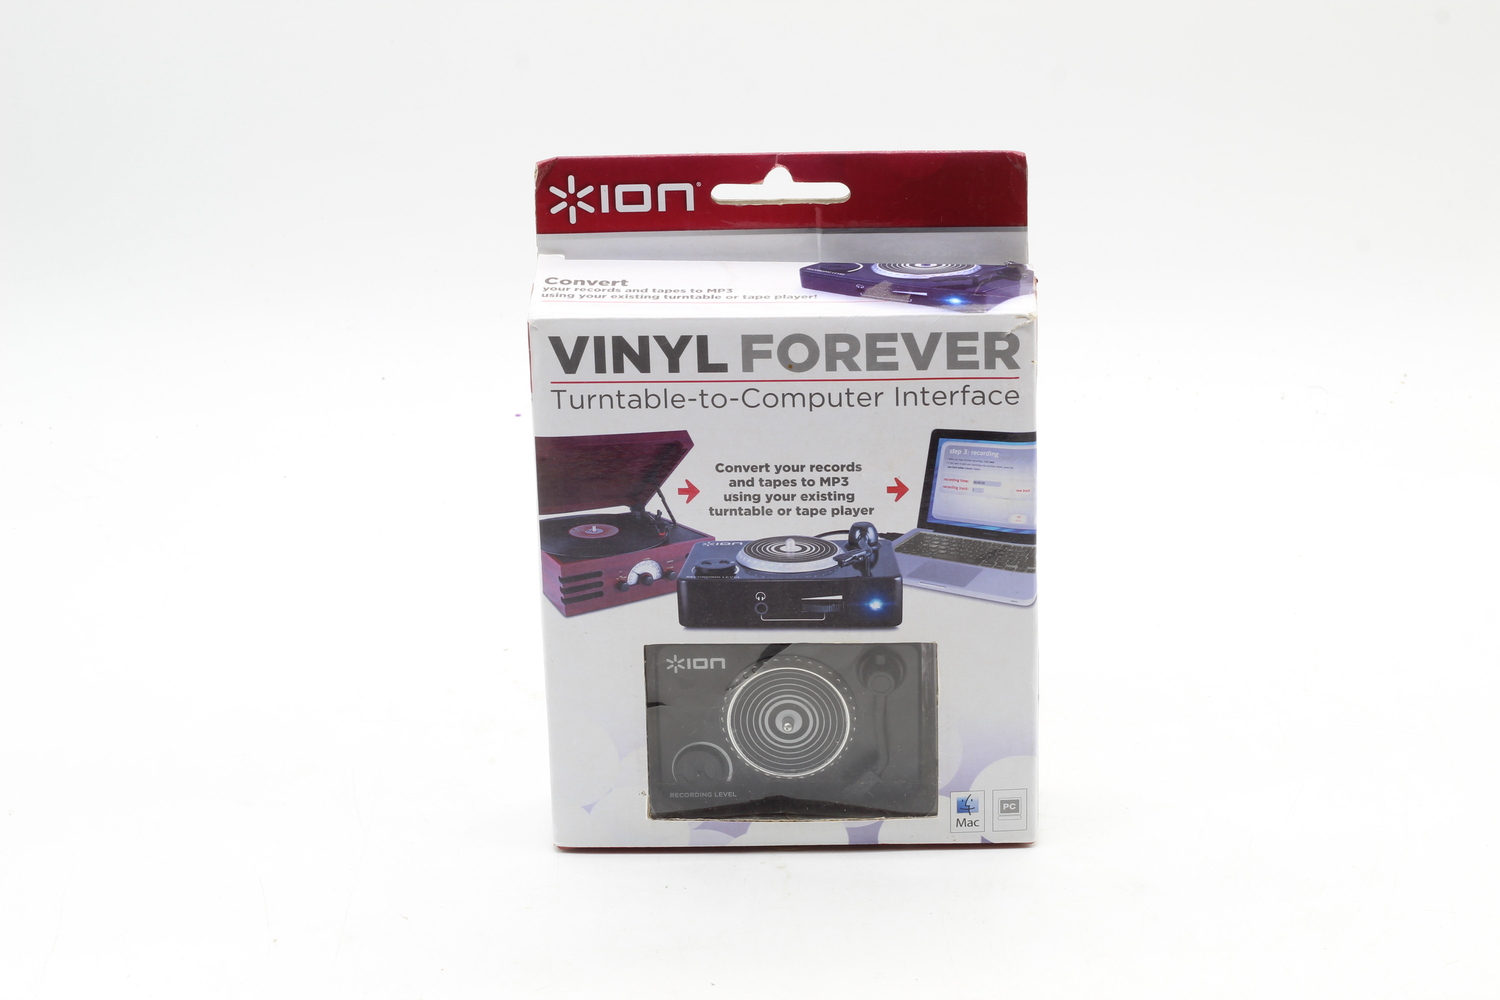 ION Vinyl Forever Turntable-to-Computer Interface Converter